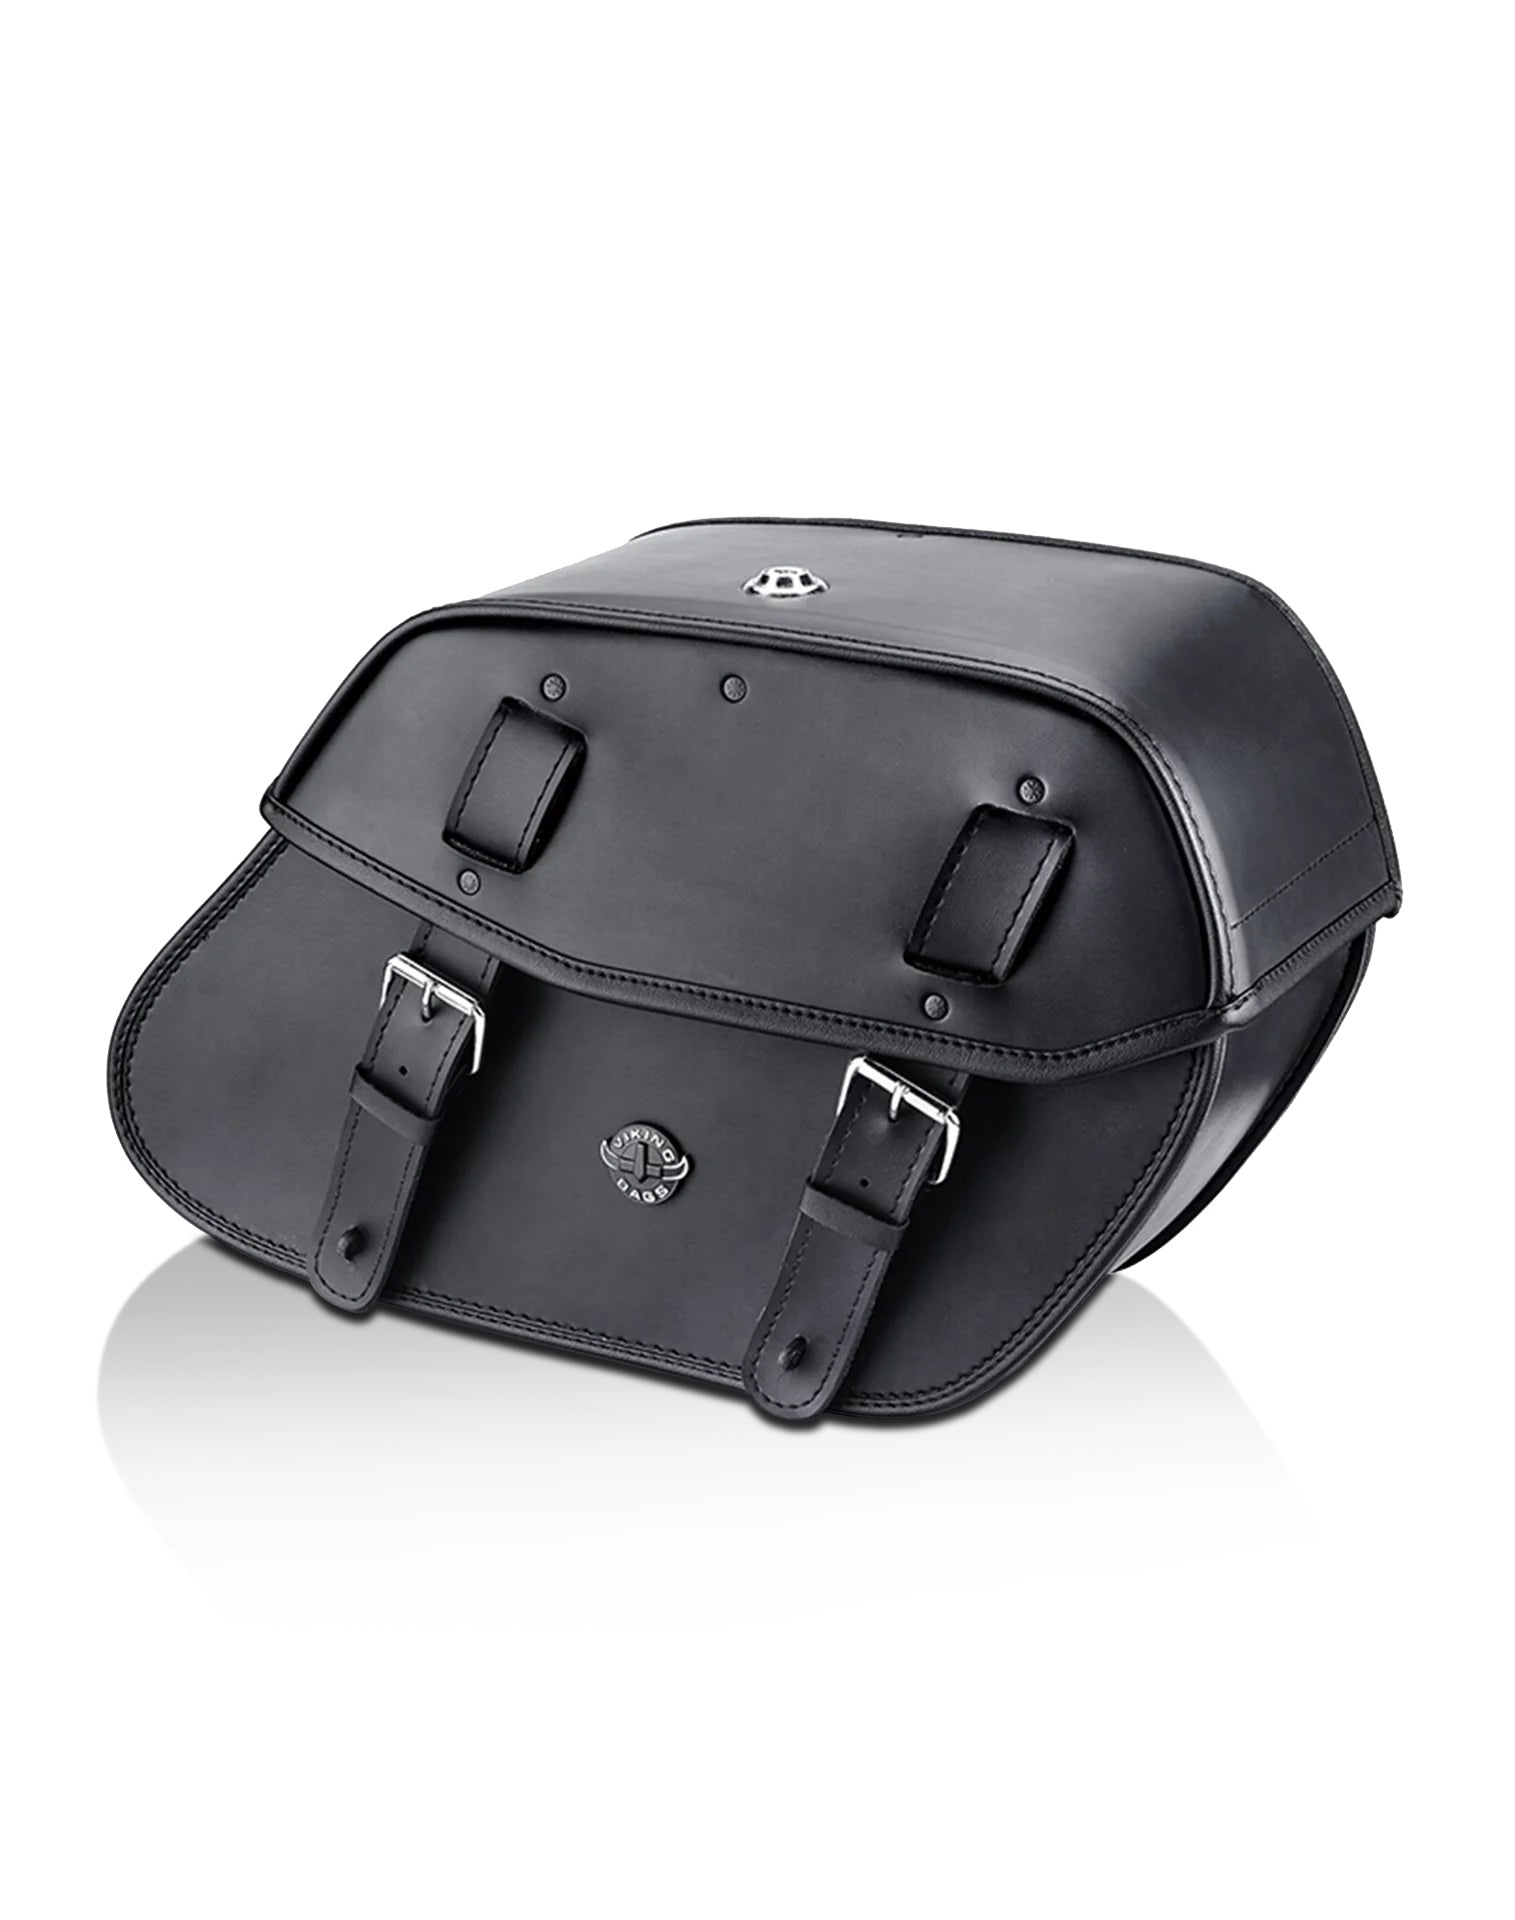 Viking Odin Large Leather Motorcycle Saddlebags For Harley Softail Breakout Fxsb Main View